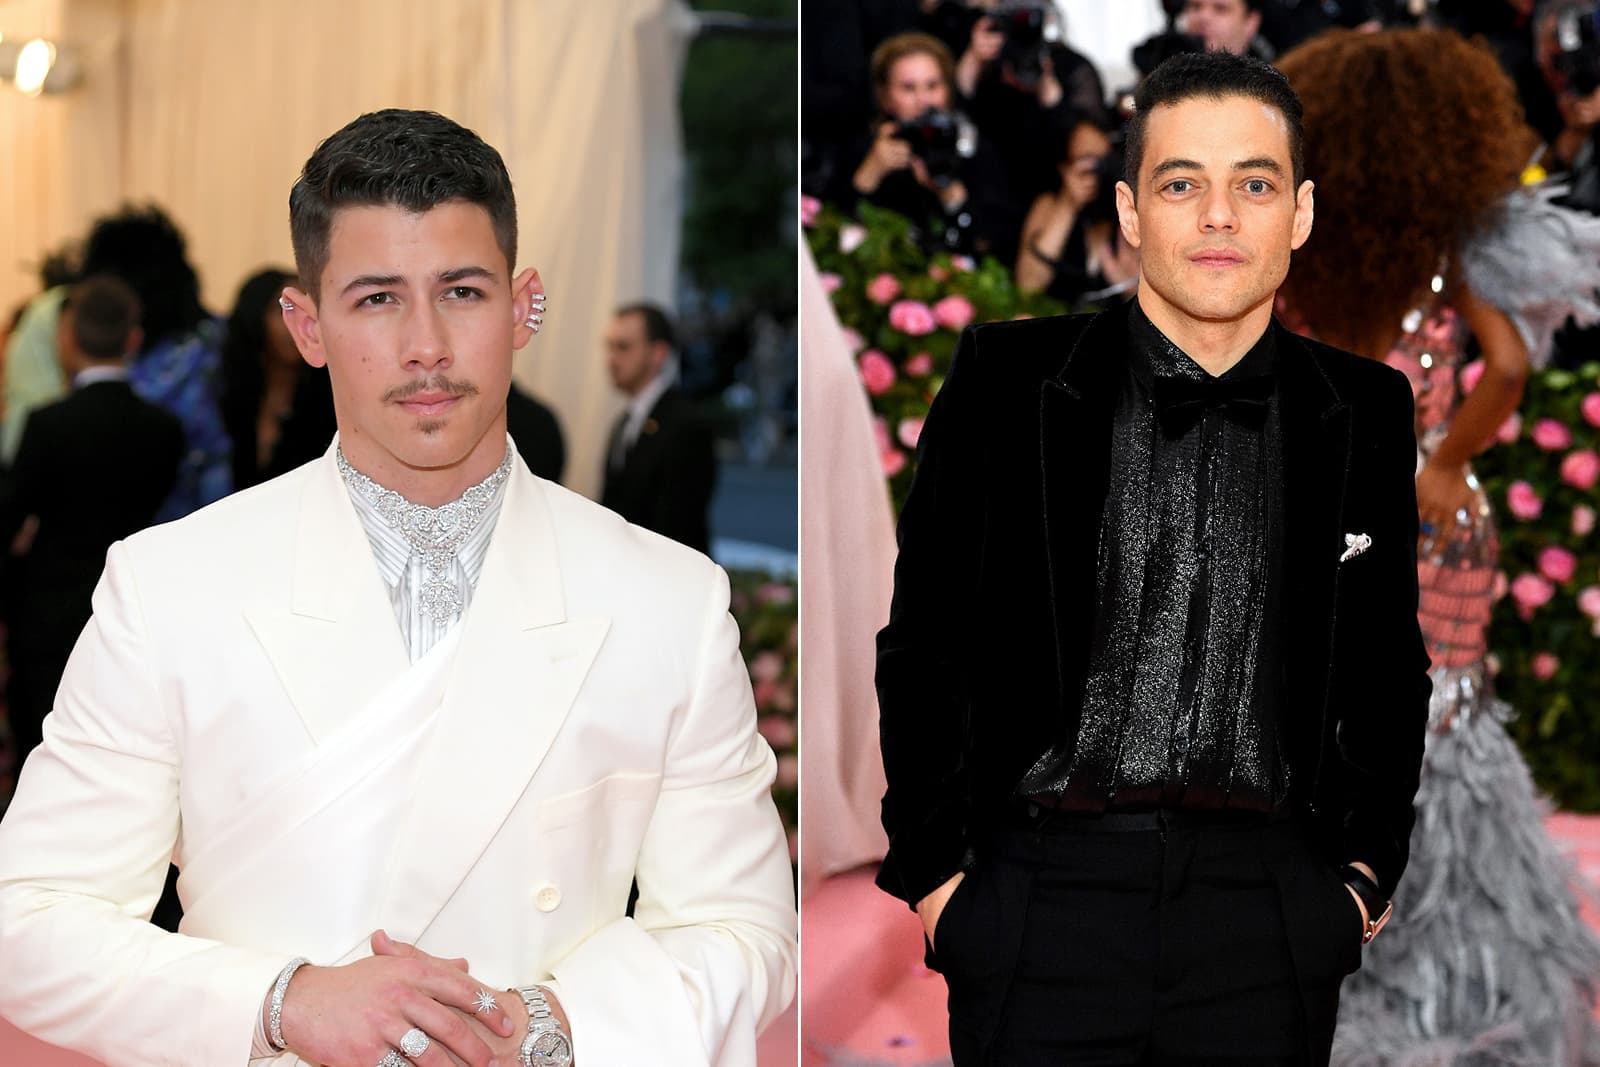  Nick Jonas wearing Chopard jewellery, including a necklace from the ‘Precious Lace Collection,’ a ring from the ‘Green Carpet Collection’, and watch from the ‘Imperiale Collection’ - all in diamonds in 18k white Fairmined gold and Rami Malek in ‘Cartier de Panthere’ brooch with emeralds, diamonds and onyx and Cartier Tank MC watch